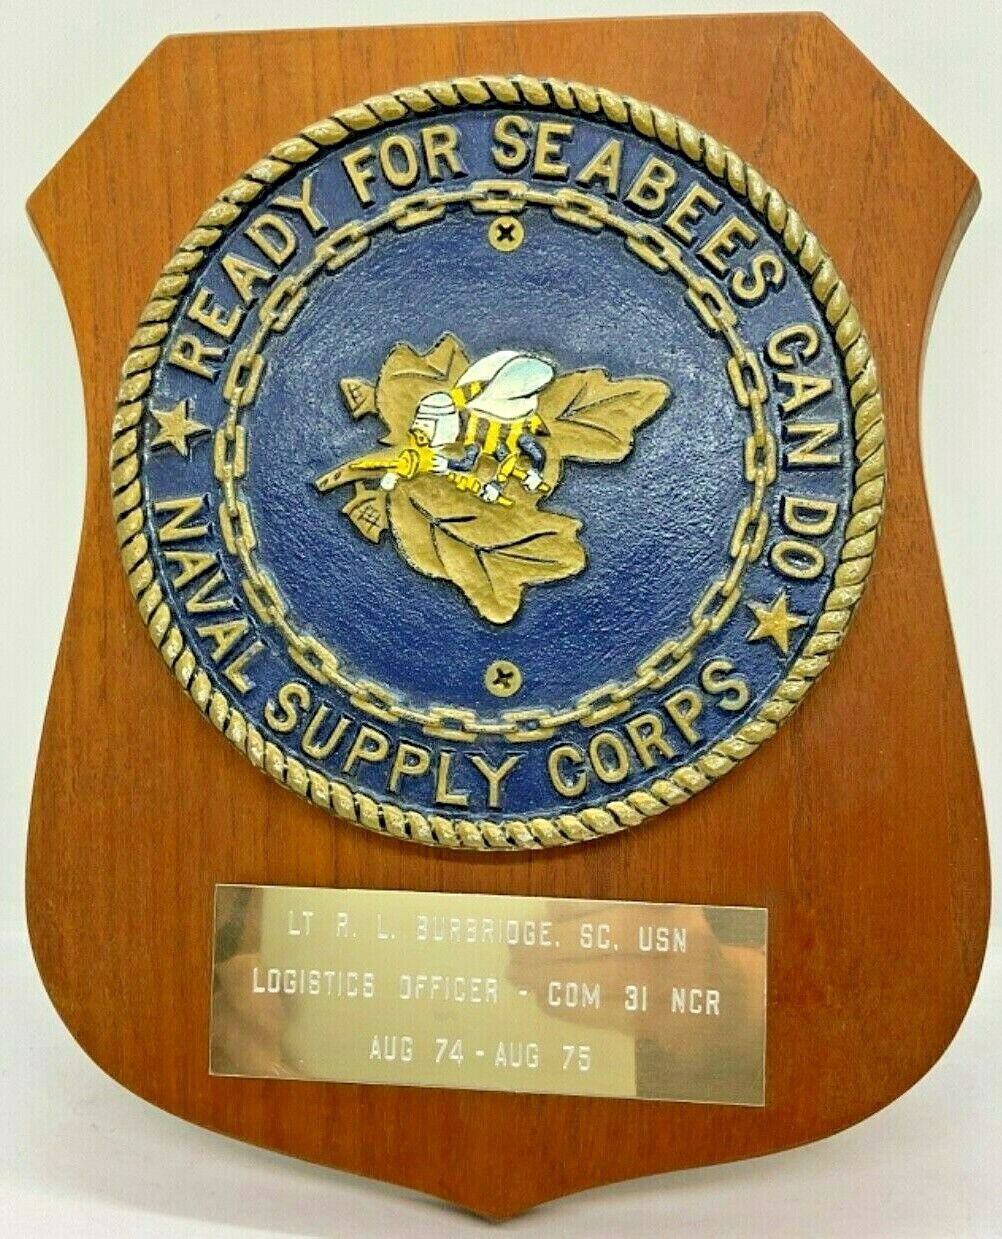 U.S. Navy, Ready for Seabees Can Do, Naval Supply Corps Vietnam Era